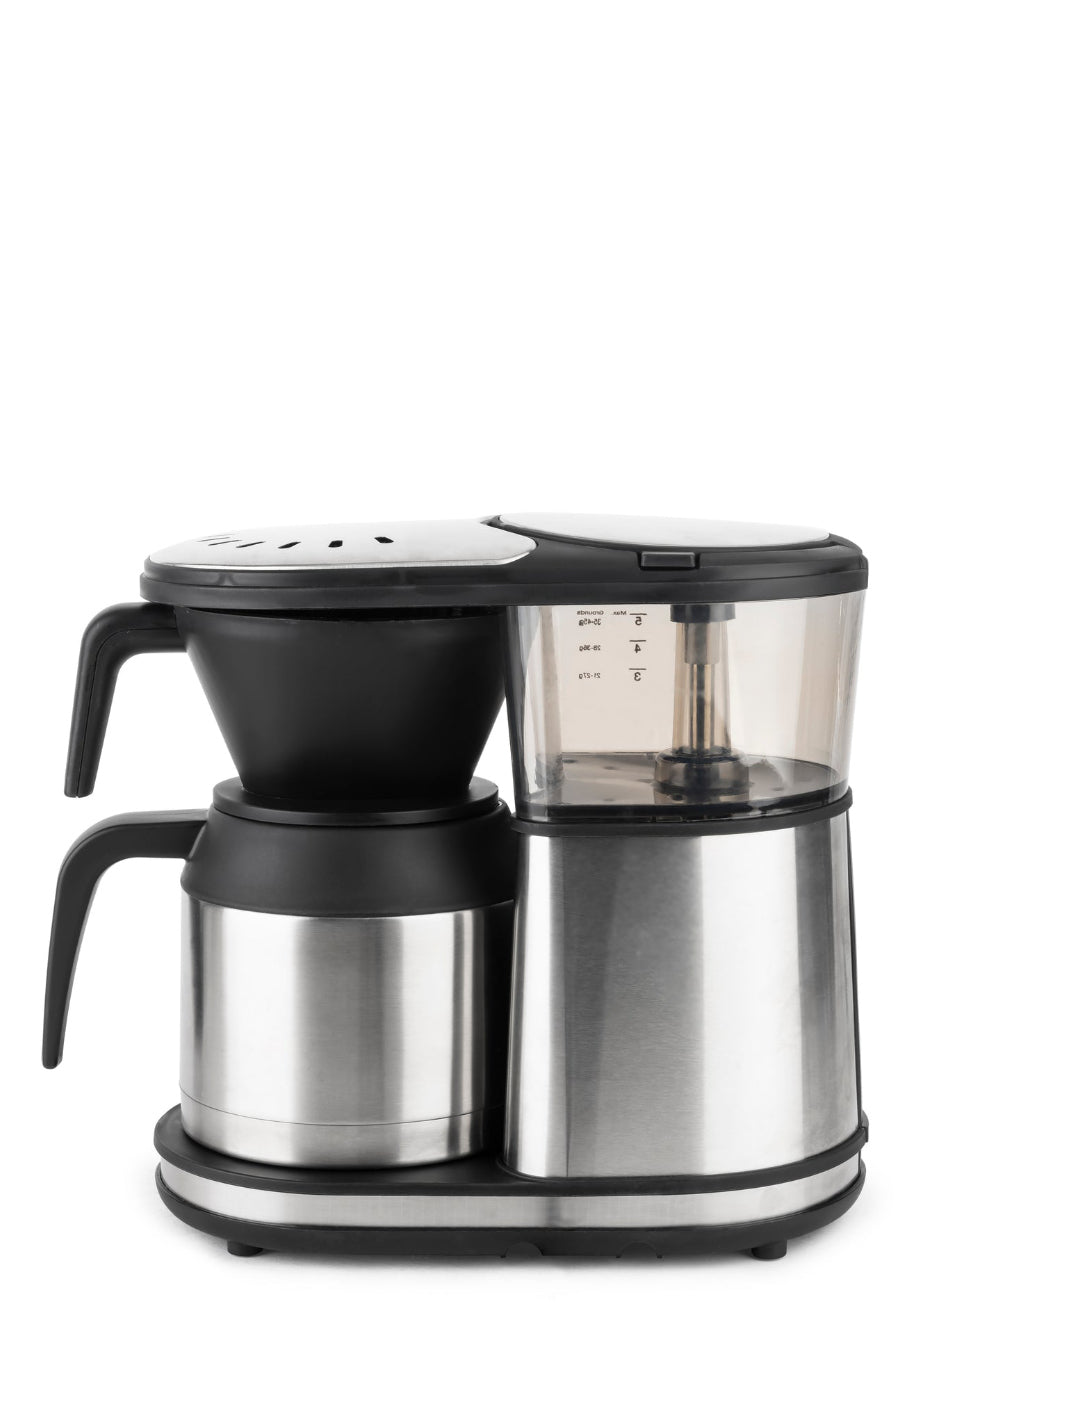 BONAVITA One-Touch Thermal Carafe Coffee Brewer (5-Cup) (120V